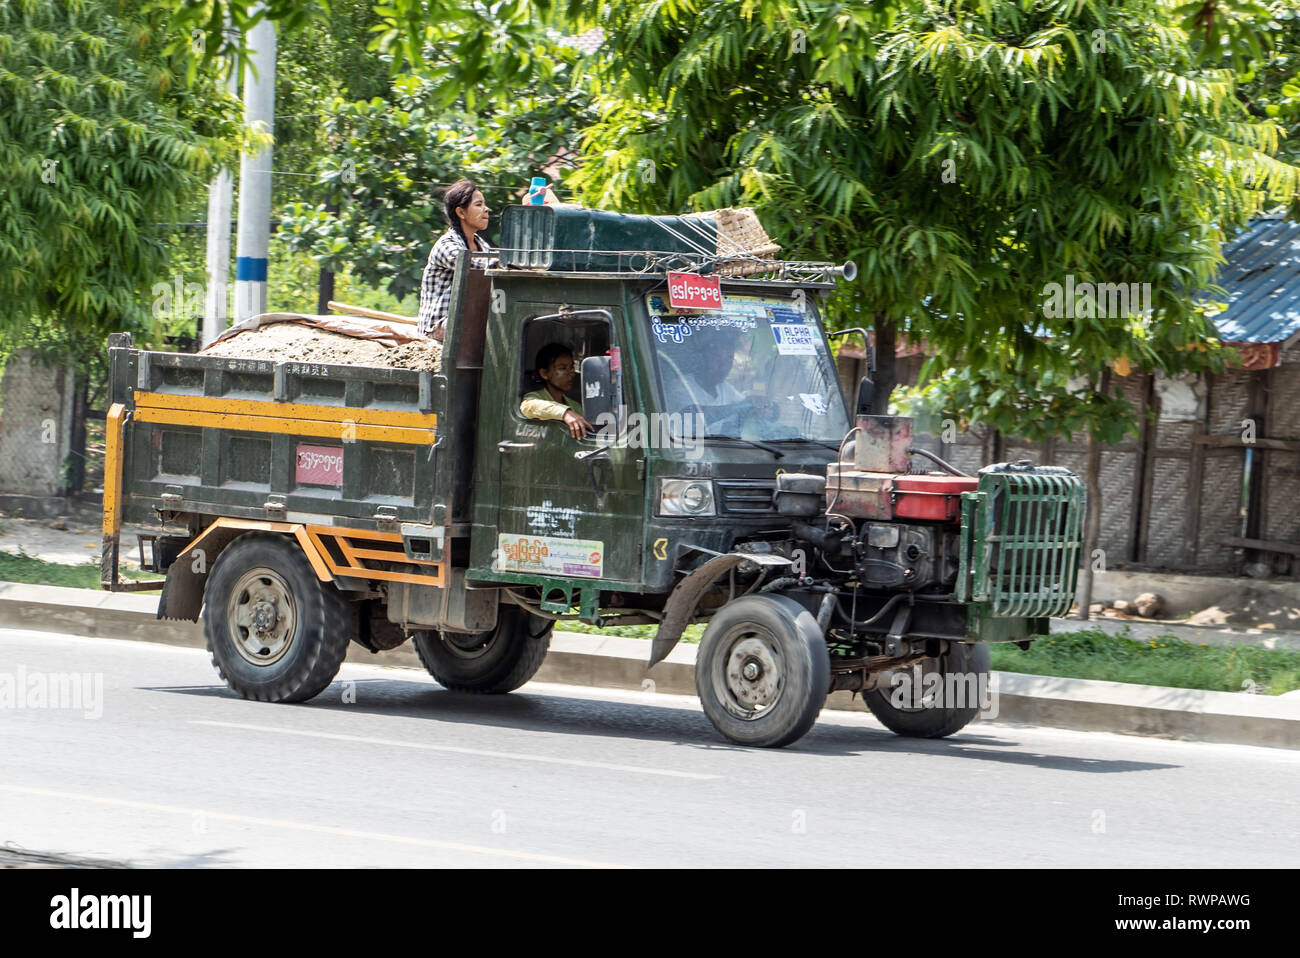 MYANMAR, MANDALAY, MAY 20 2018, Chinese Manufactured tractor truck ride on street at Mandalay city. Typical open-fronted battered lorry vehicle with a Stock Photo